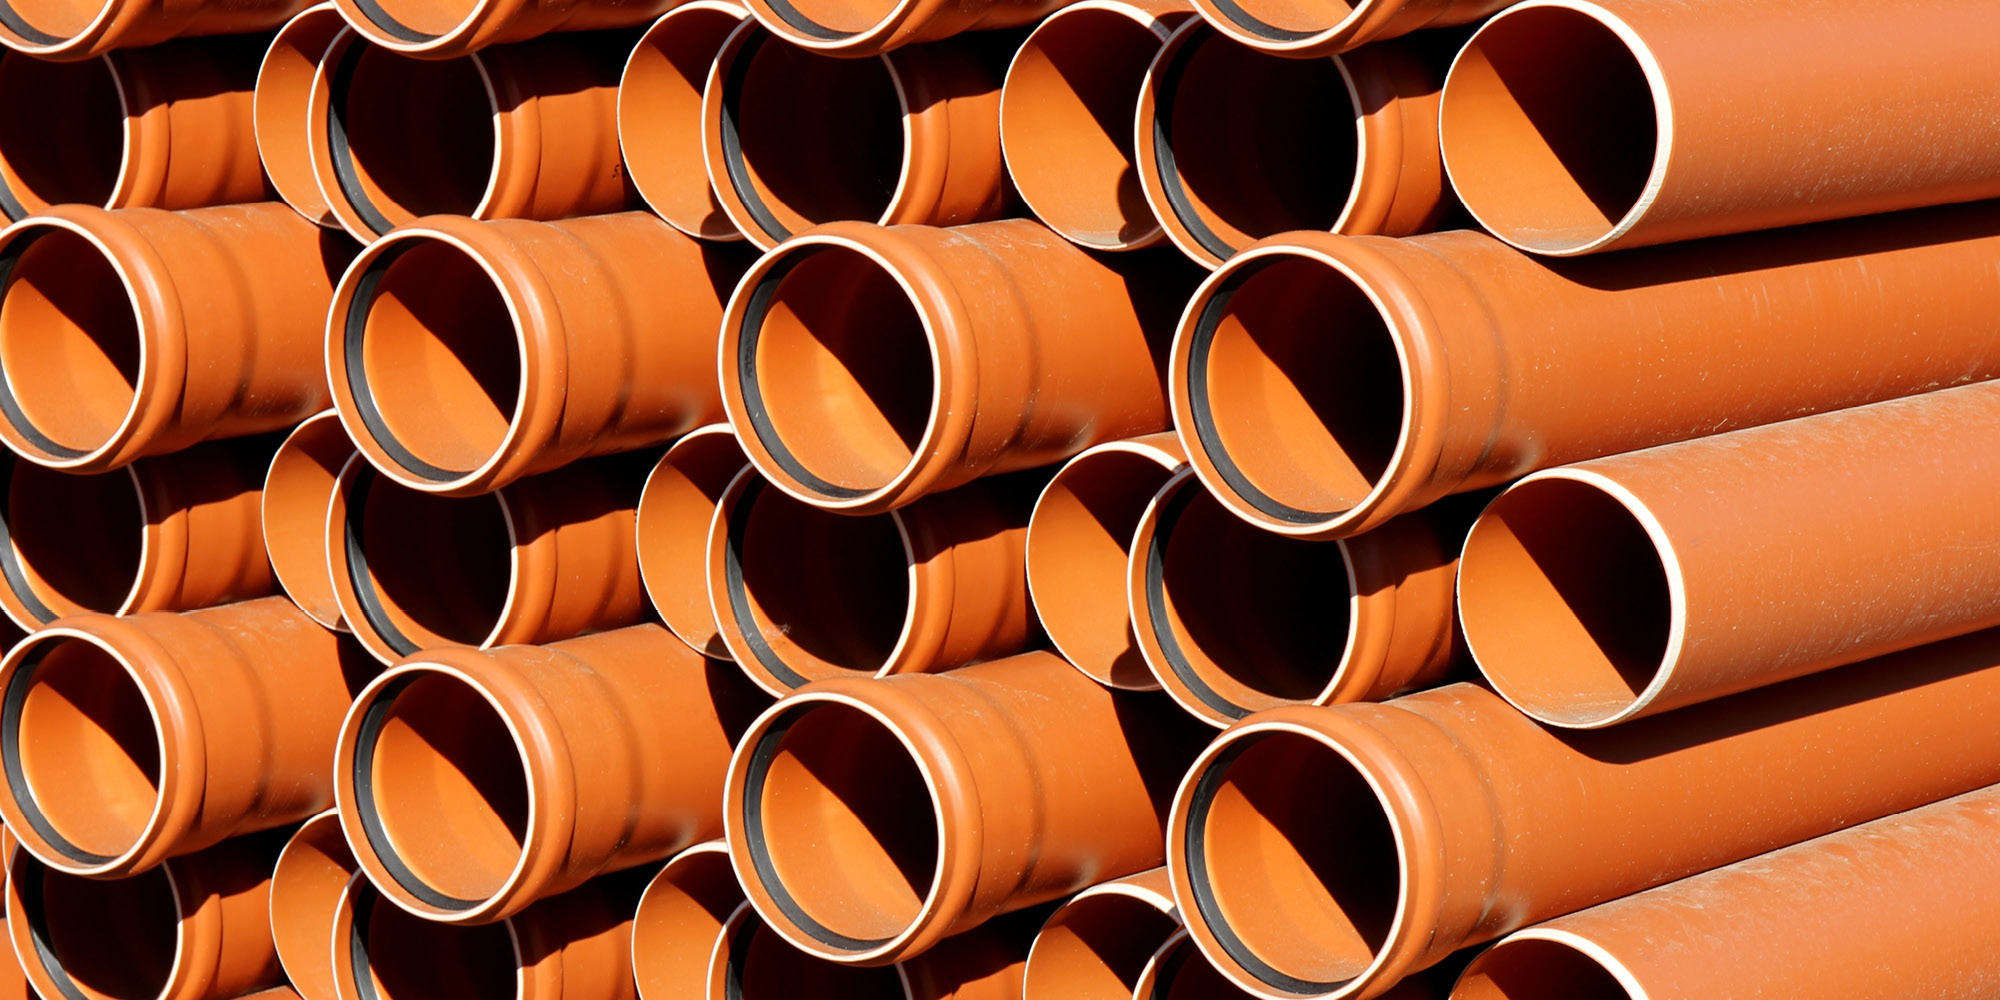 Economical coloring of PVC pipes and fittings.